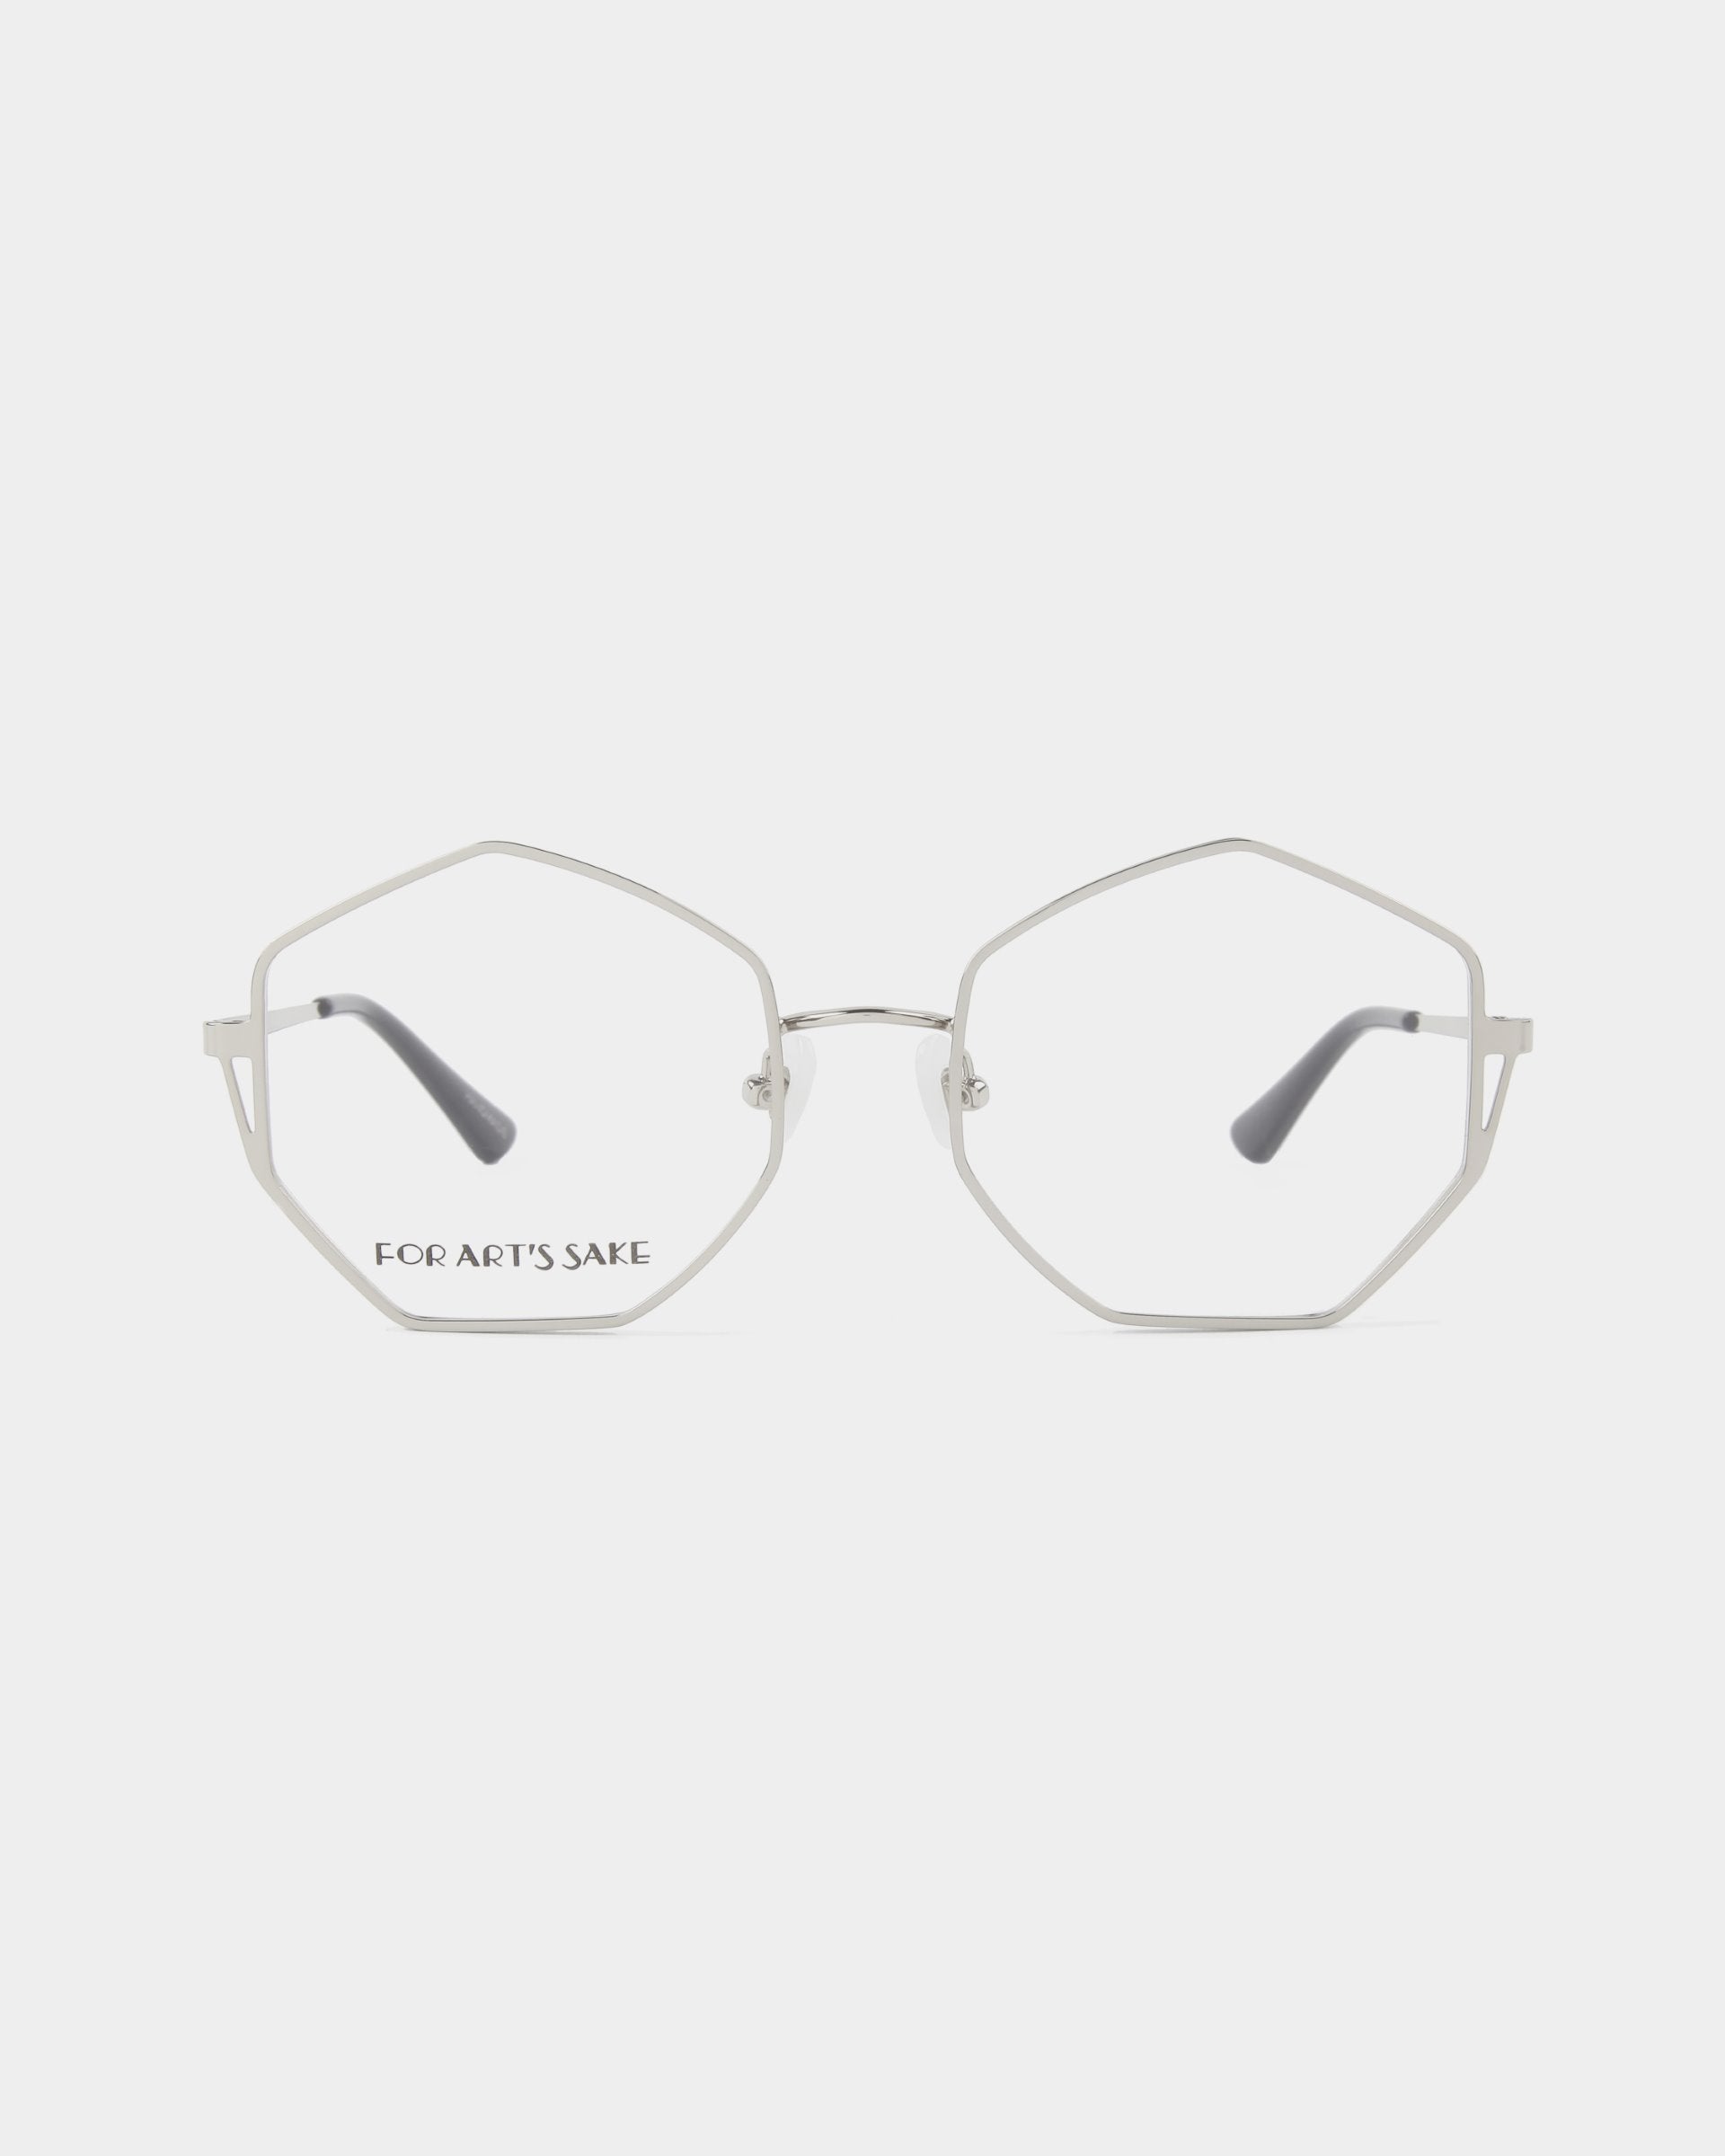 A pair of Antidote eyeglasses from For Art&#39;s Sake® with thin, 18-karat gold-plated octagonal frames and clear lenses. The bridge and temples are minimalistic, providing a modern and stylish look. The left lens displays the text &quot;FOR ART&#39;S SAKE&quot; in black. The background is plain white.